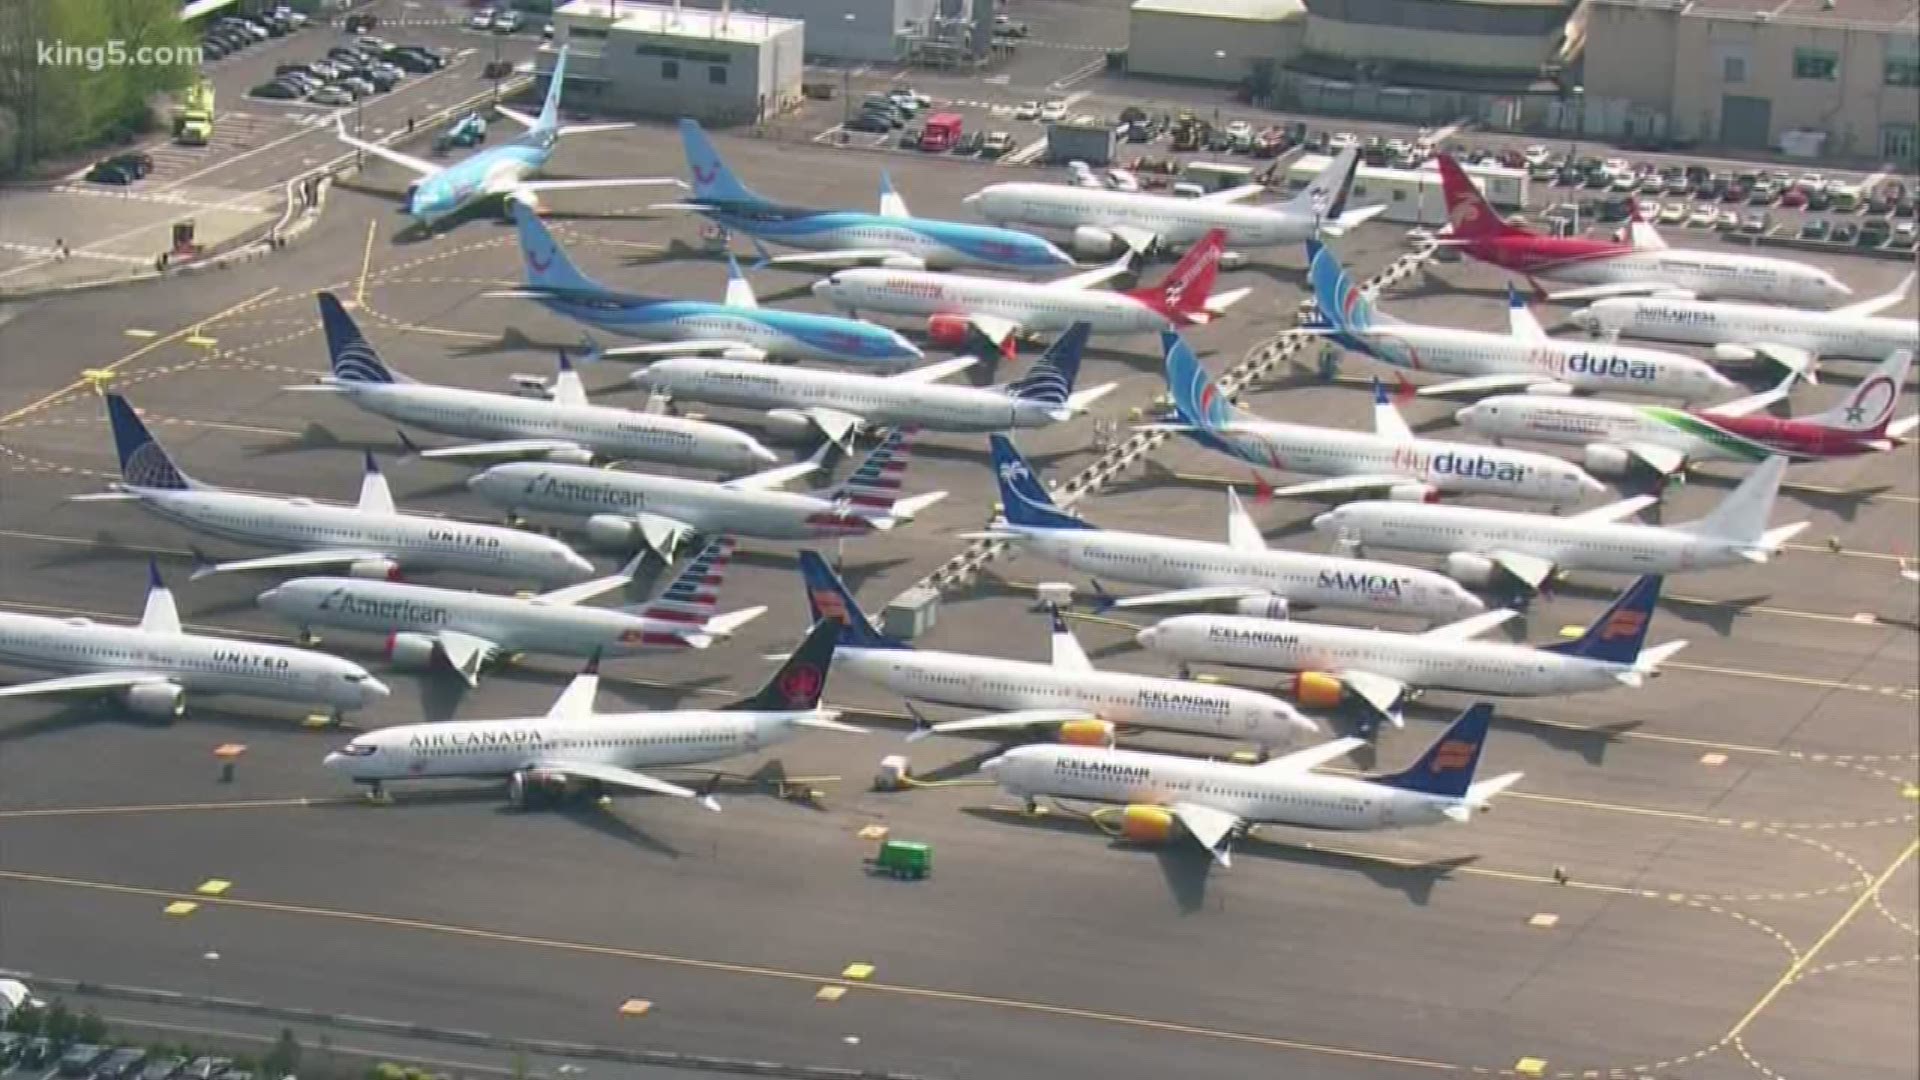 The company says it will take a nearly $5 billion hit due to the 737 MAX grounding.